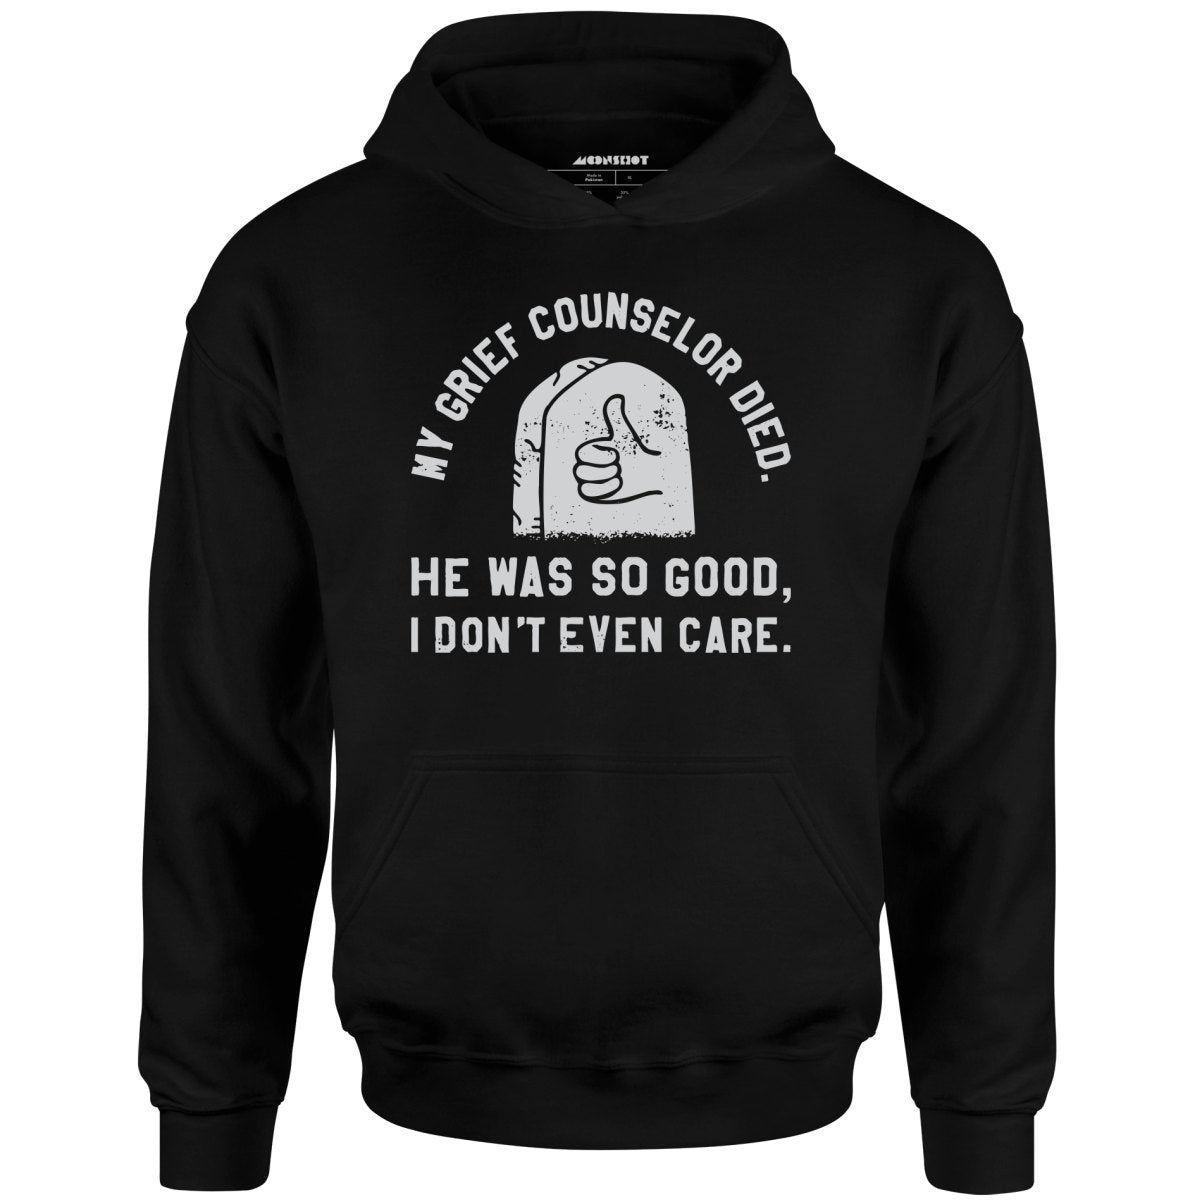 My Grief Counselor Died - Unisex Hoodie